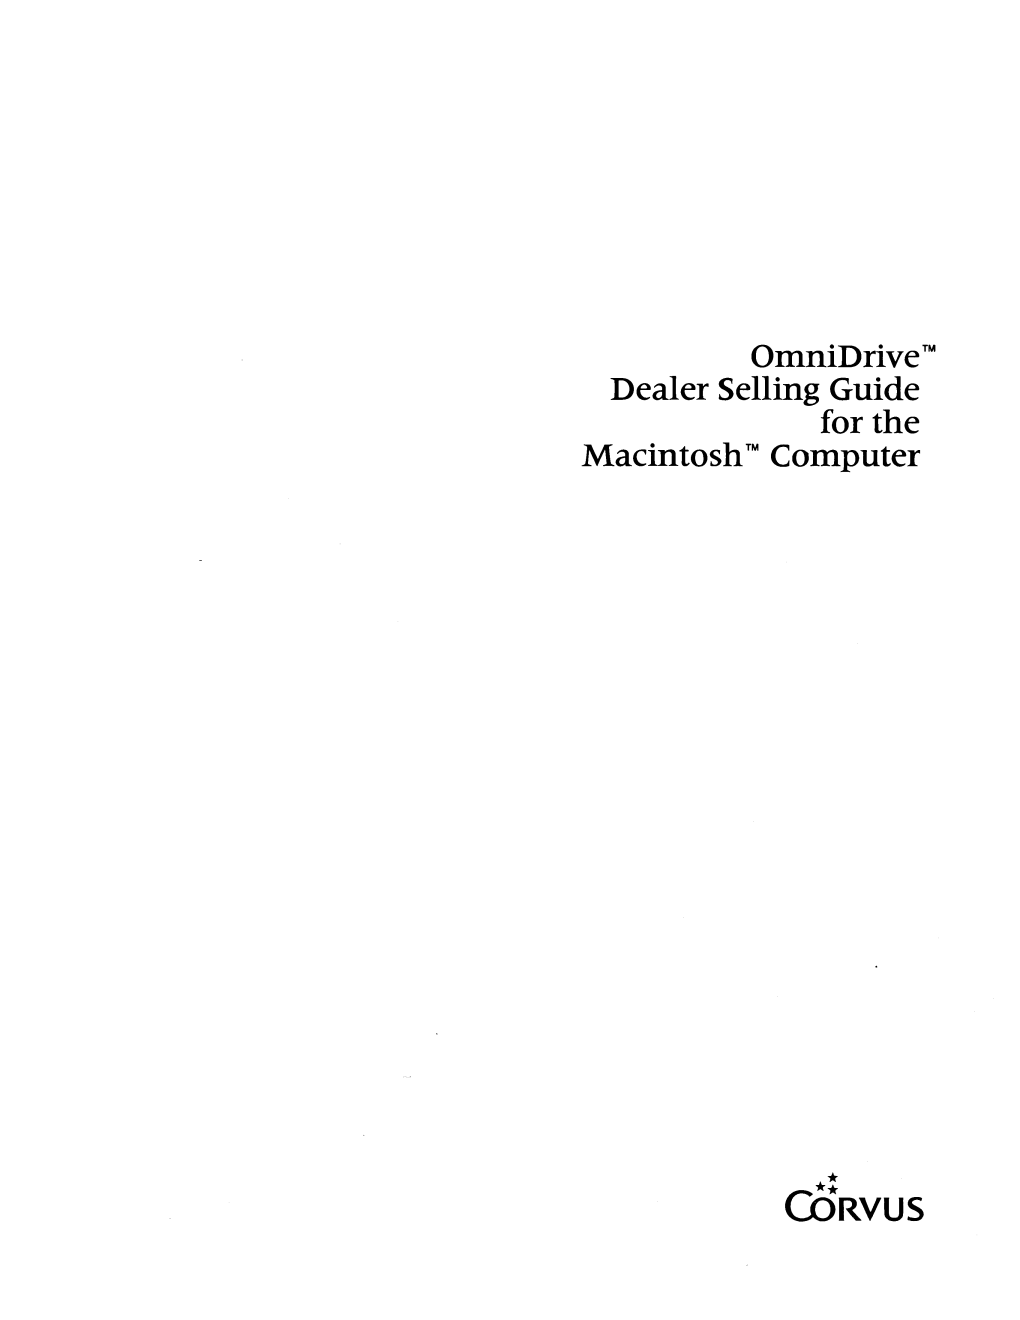 O Illnid Rive ™ Dealer Selling Guide for the Macintosh ™ Coillputer